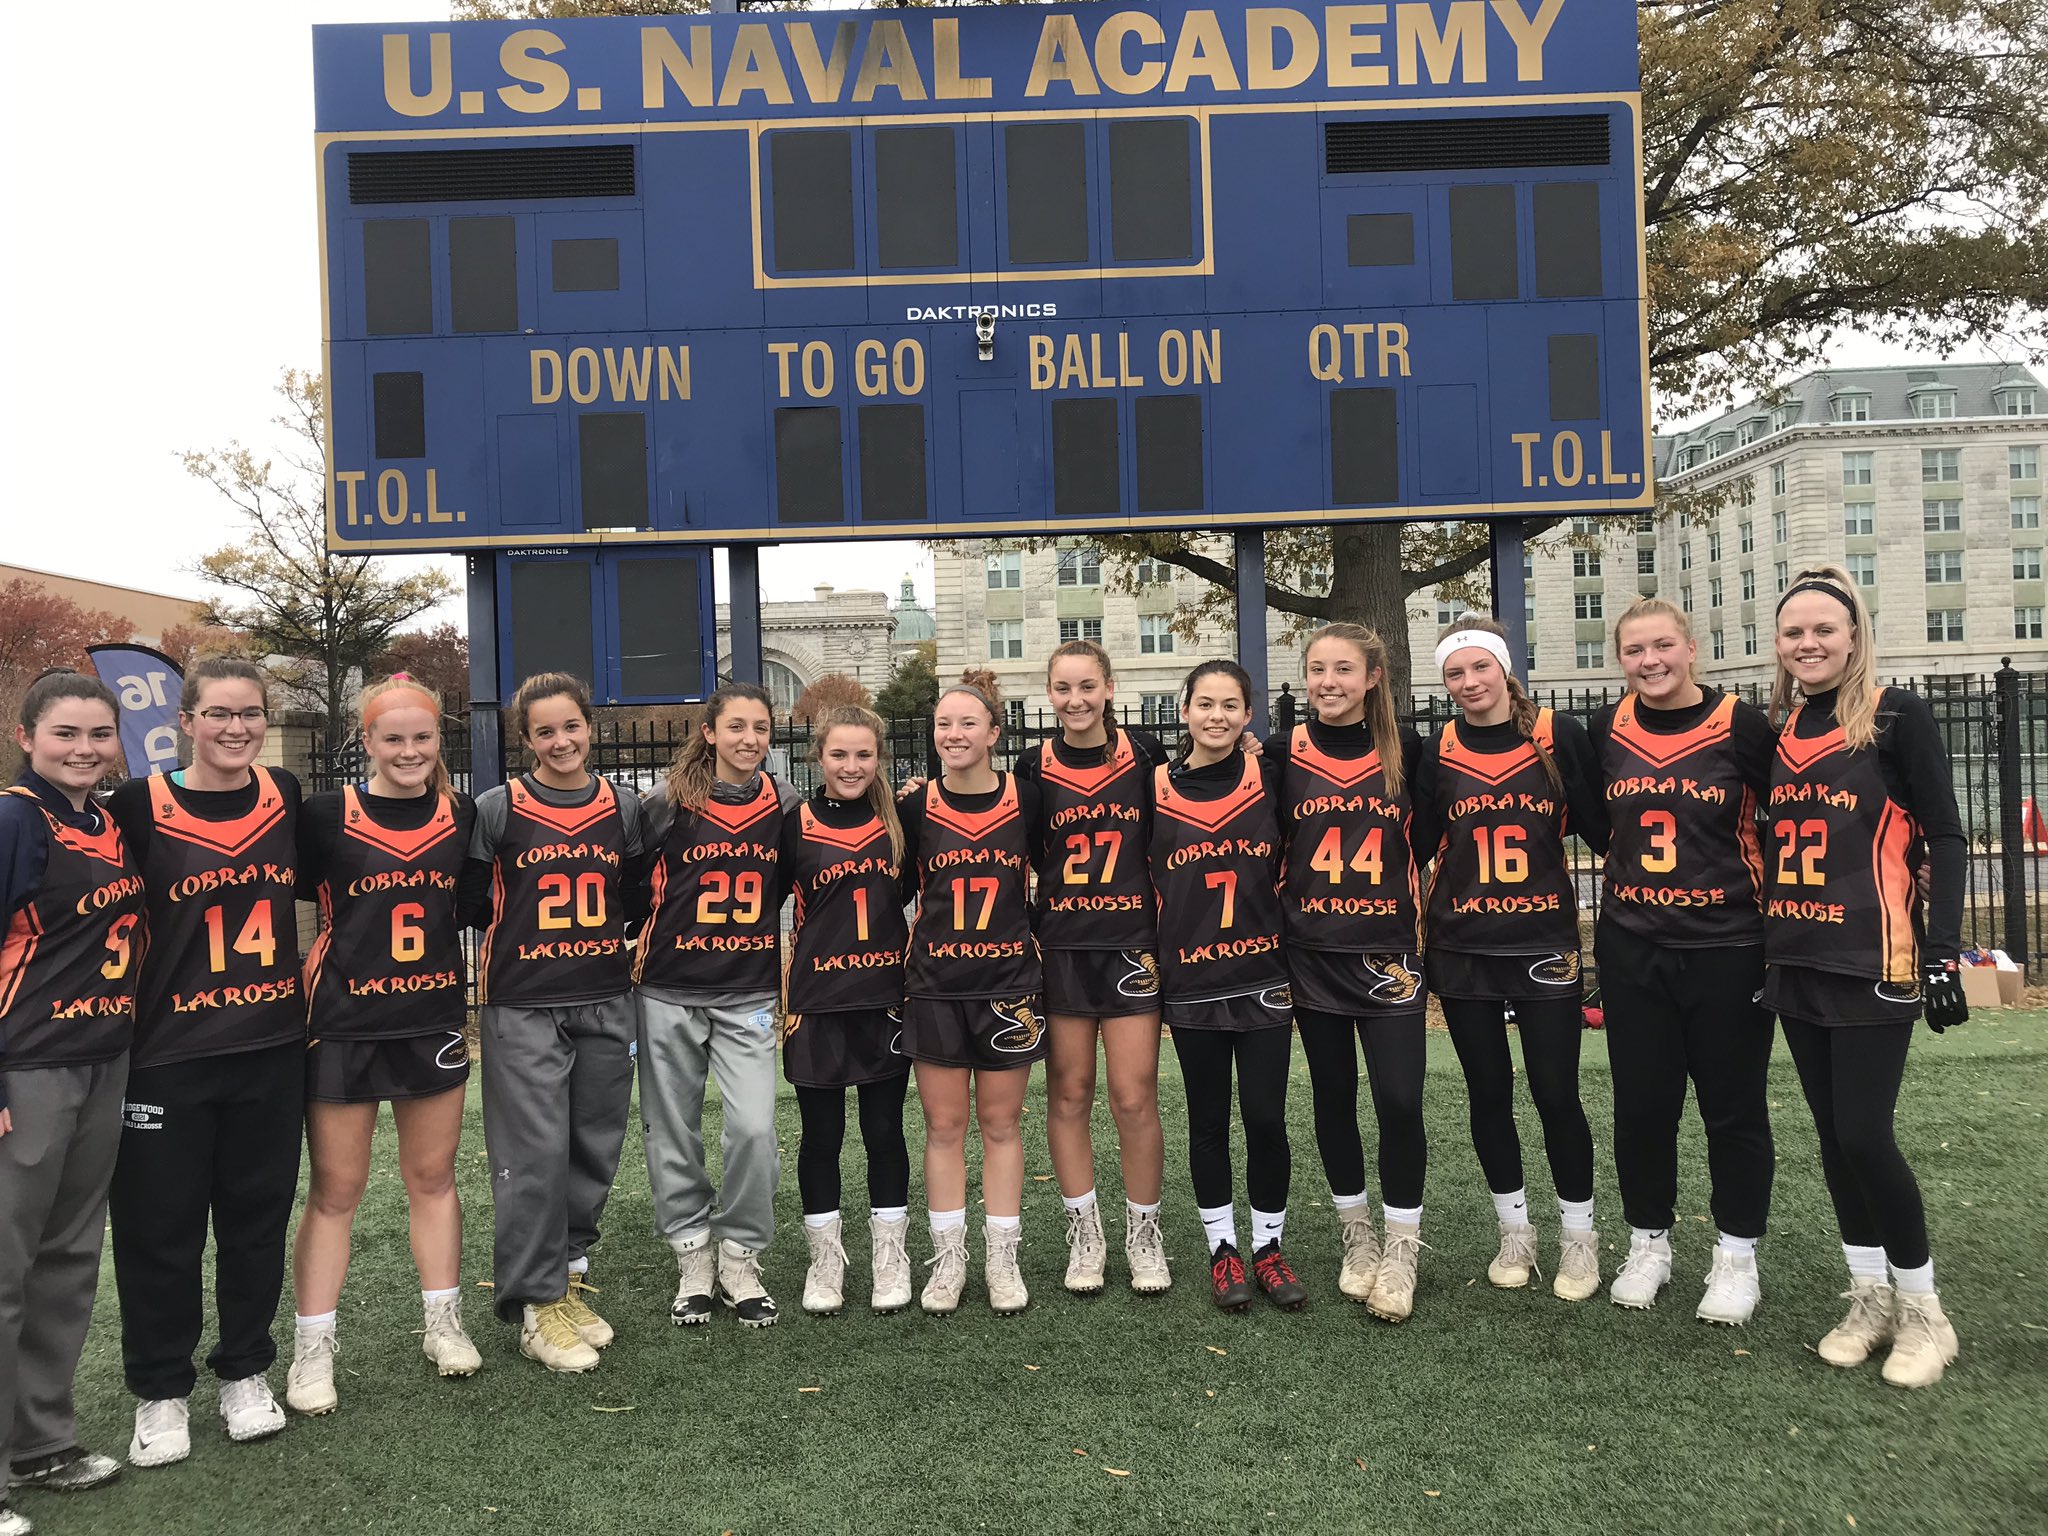 Cobra Kai 2021 team dressed in black uniforms stand in front of a Naval Academy scoreboard. 